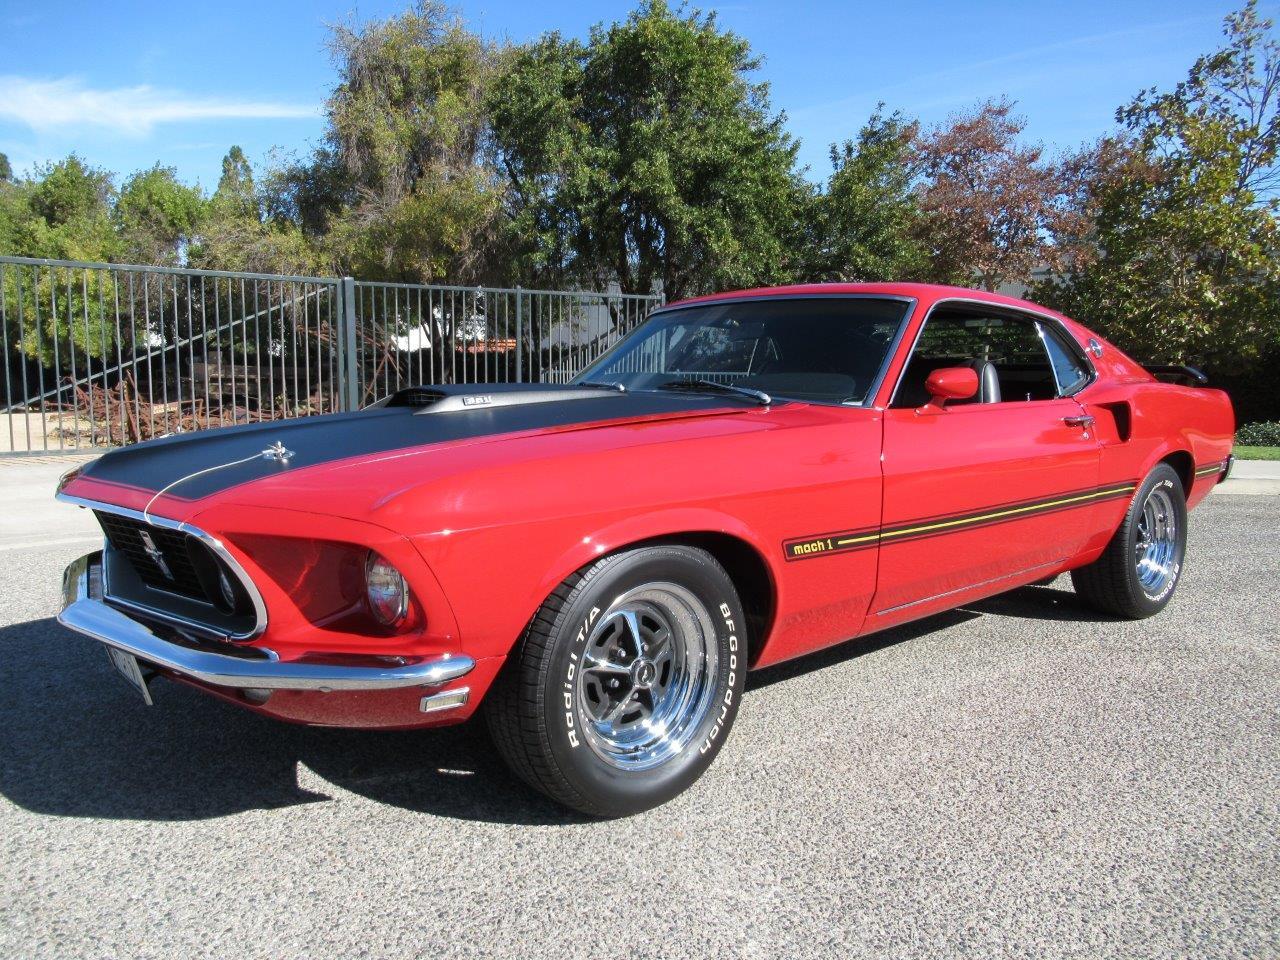 1969 Ford Mustang Mach 1 for Sale | ClassicCars.com | CC-1162462